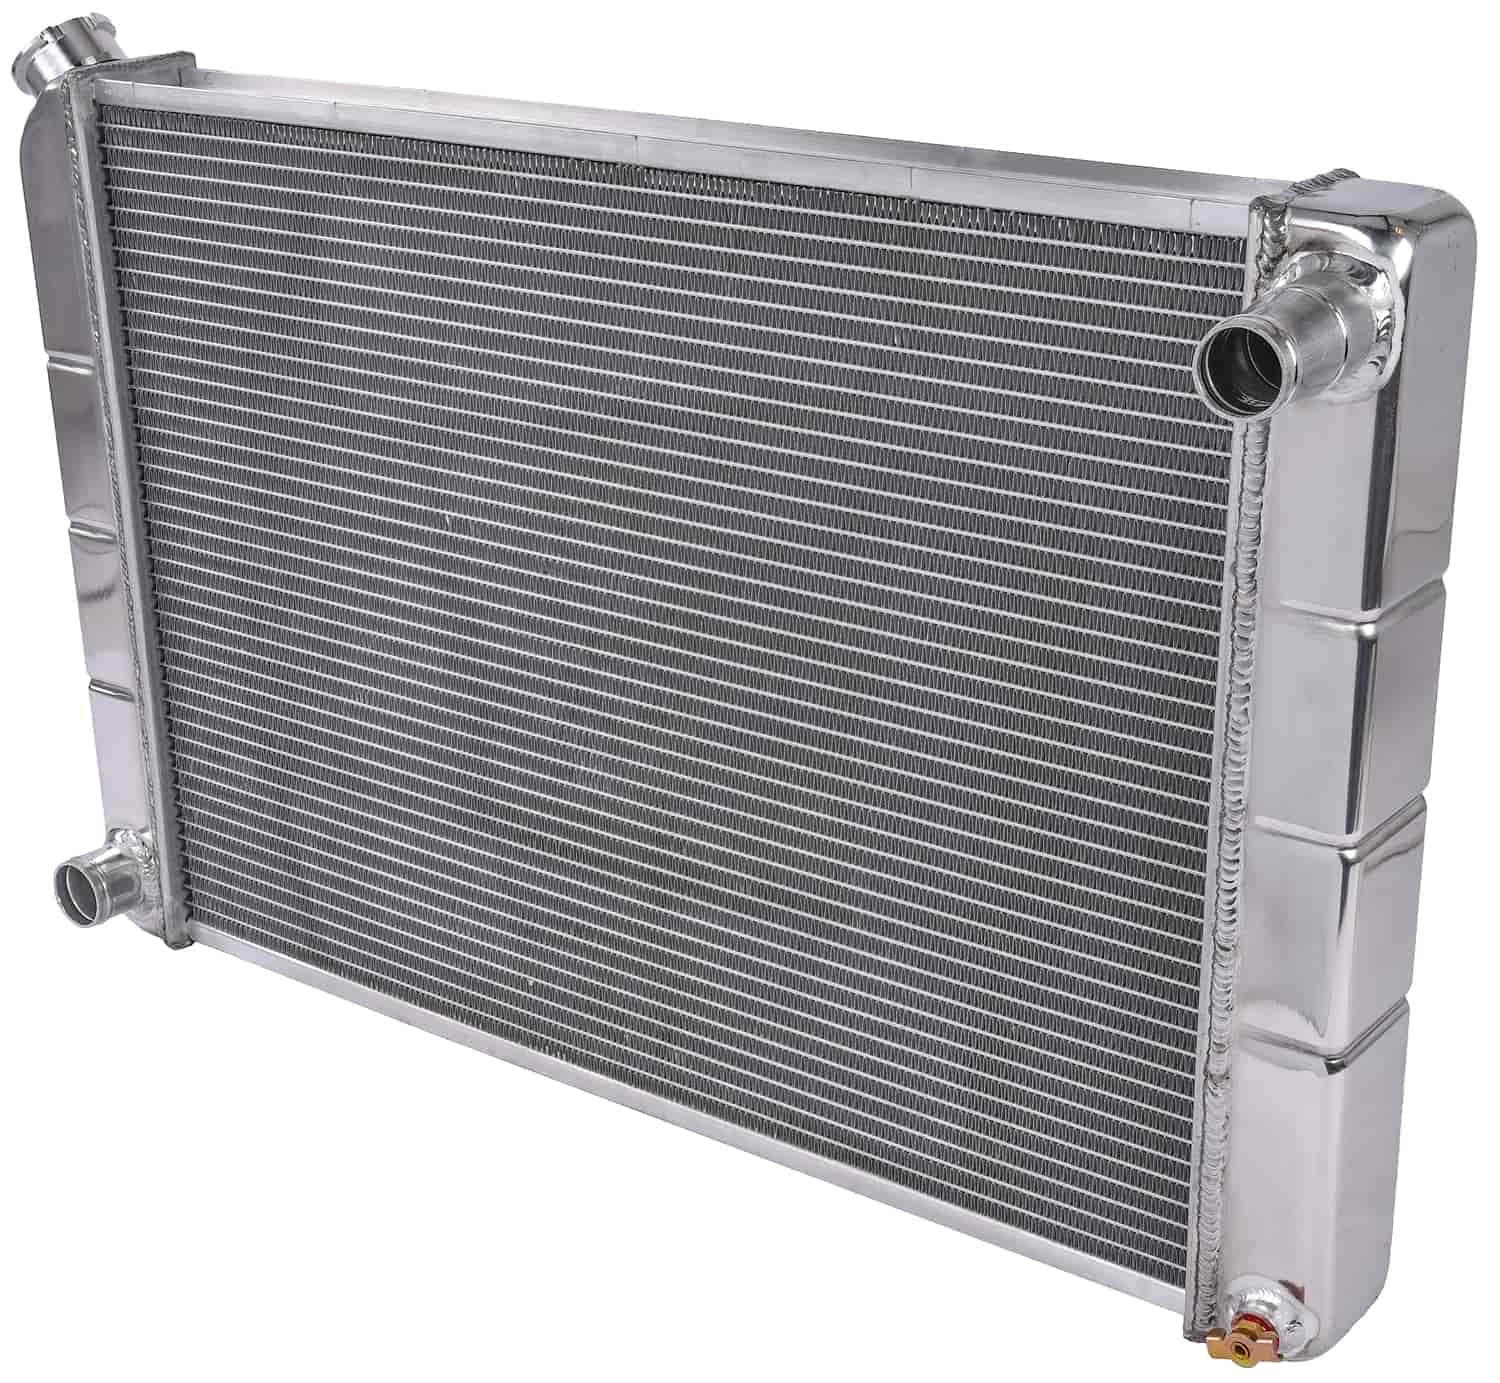 Ready Fit Aluminum Radiator for 1979-1993 Mustang Manual Transmission